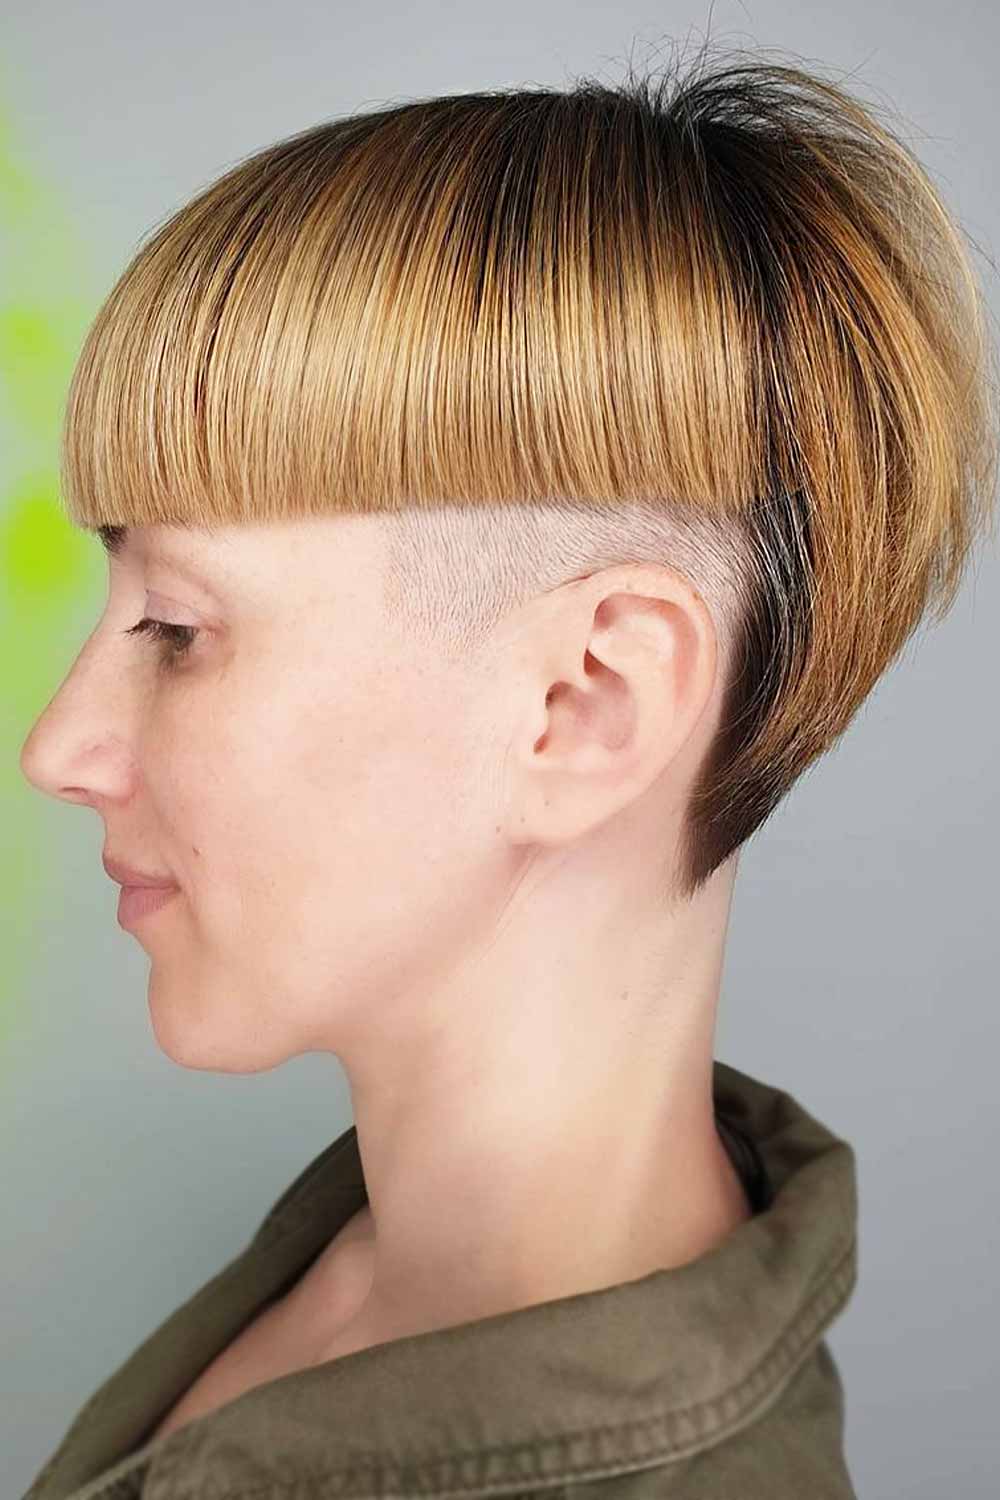 Short Hairstyle With Shaved Temple Undercut #undercuthairstyles #undercutwomen